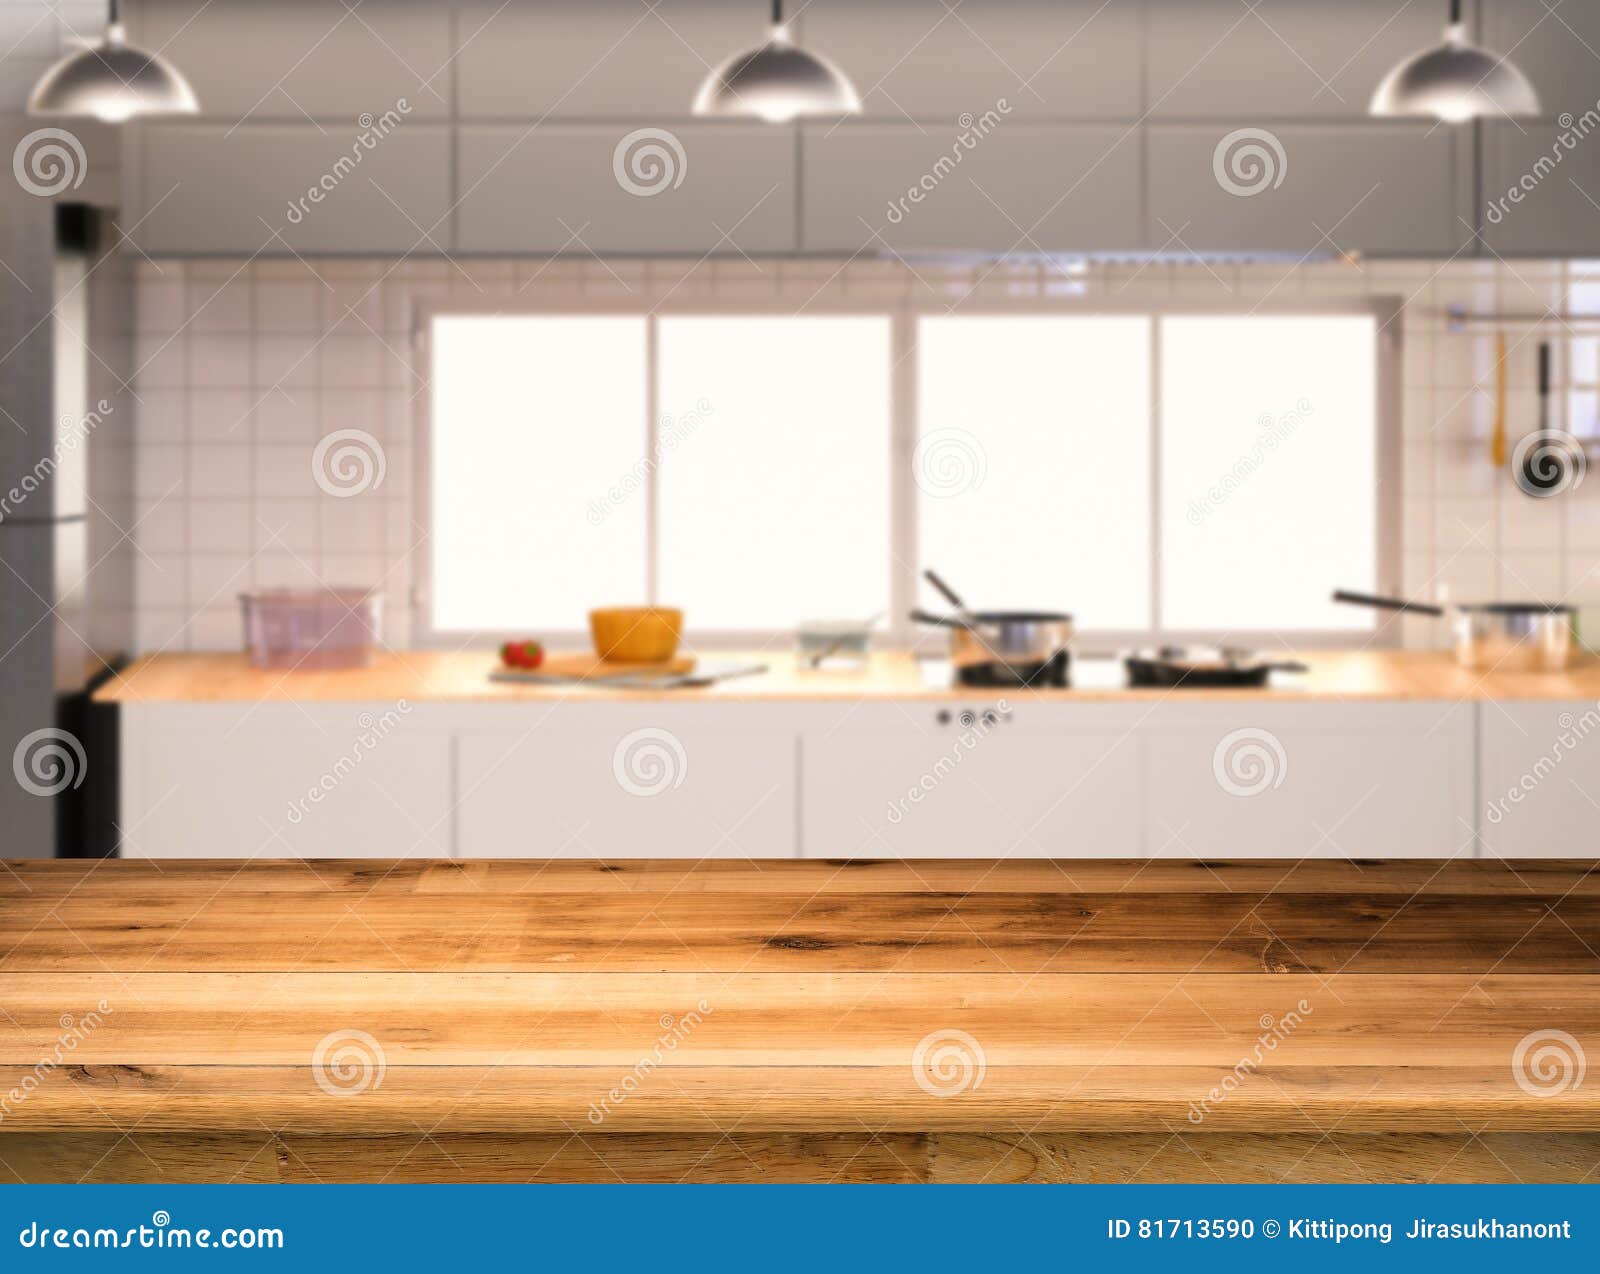 Empty wooden counter top stock photo. Image of table - 81713590